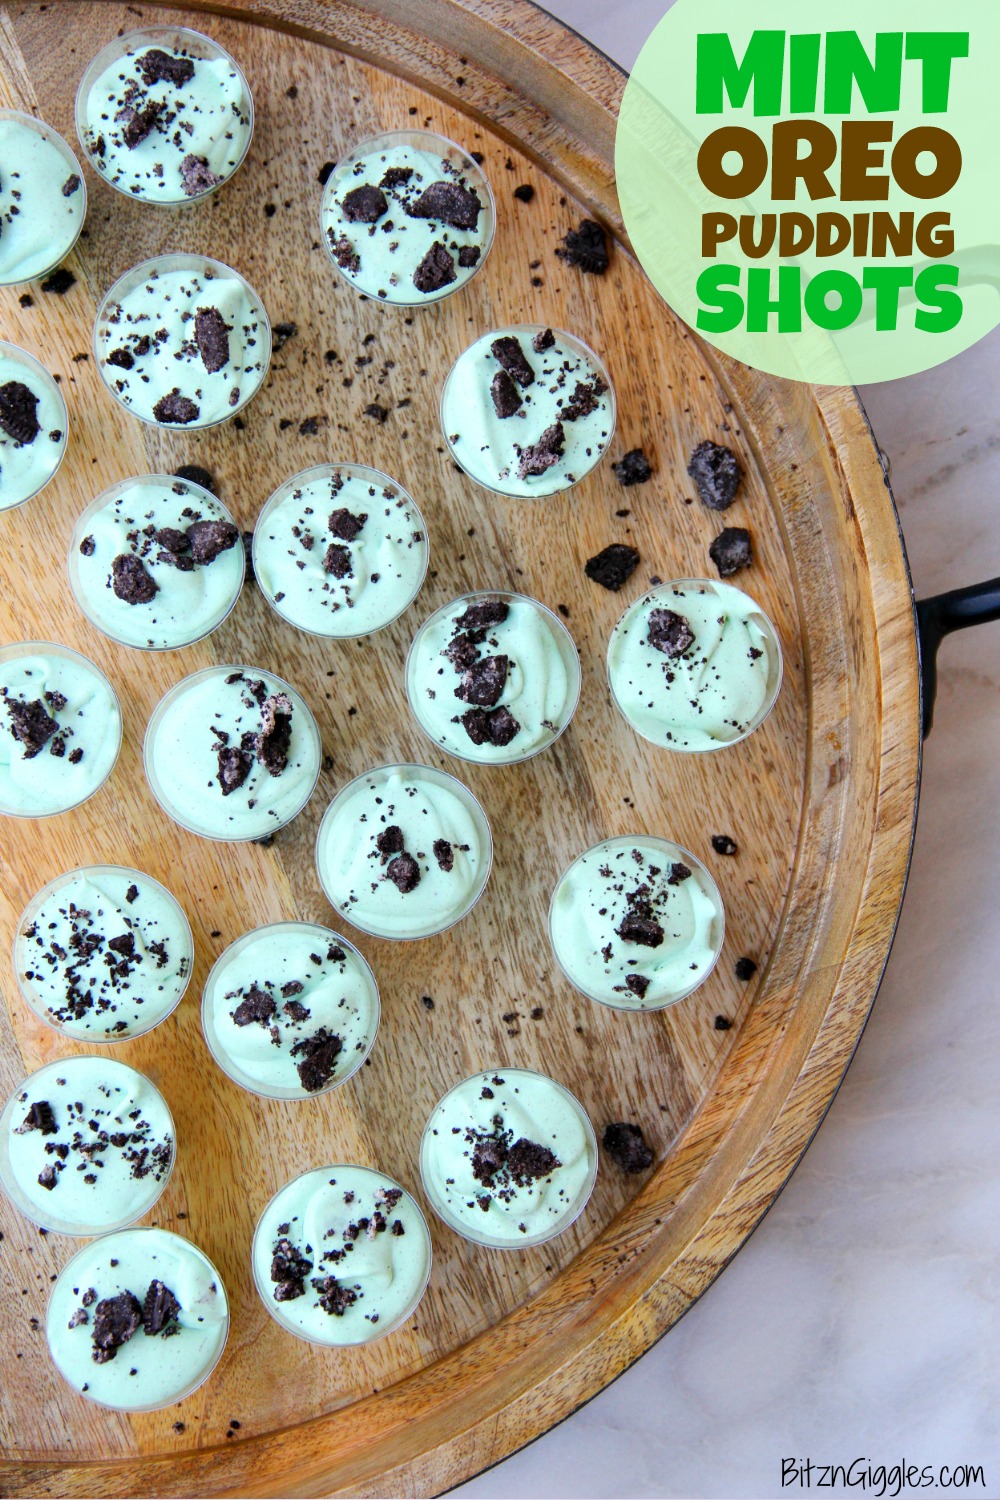 Mint Oreo Pudding Shots - Perfect for the holidays, St. Patrick's Day or just whenever you're in the mood for a little taste of mint and chocolate. These taste just like an adult version of a Thin Mint Girl Scout Cookie! 